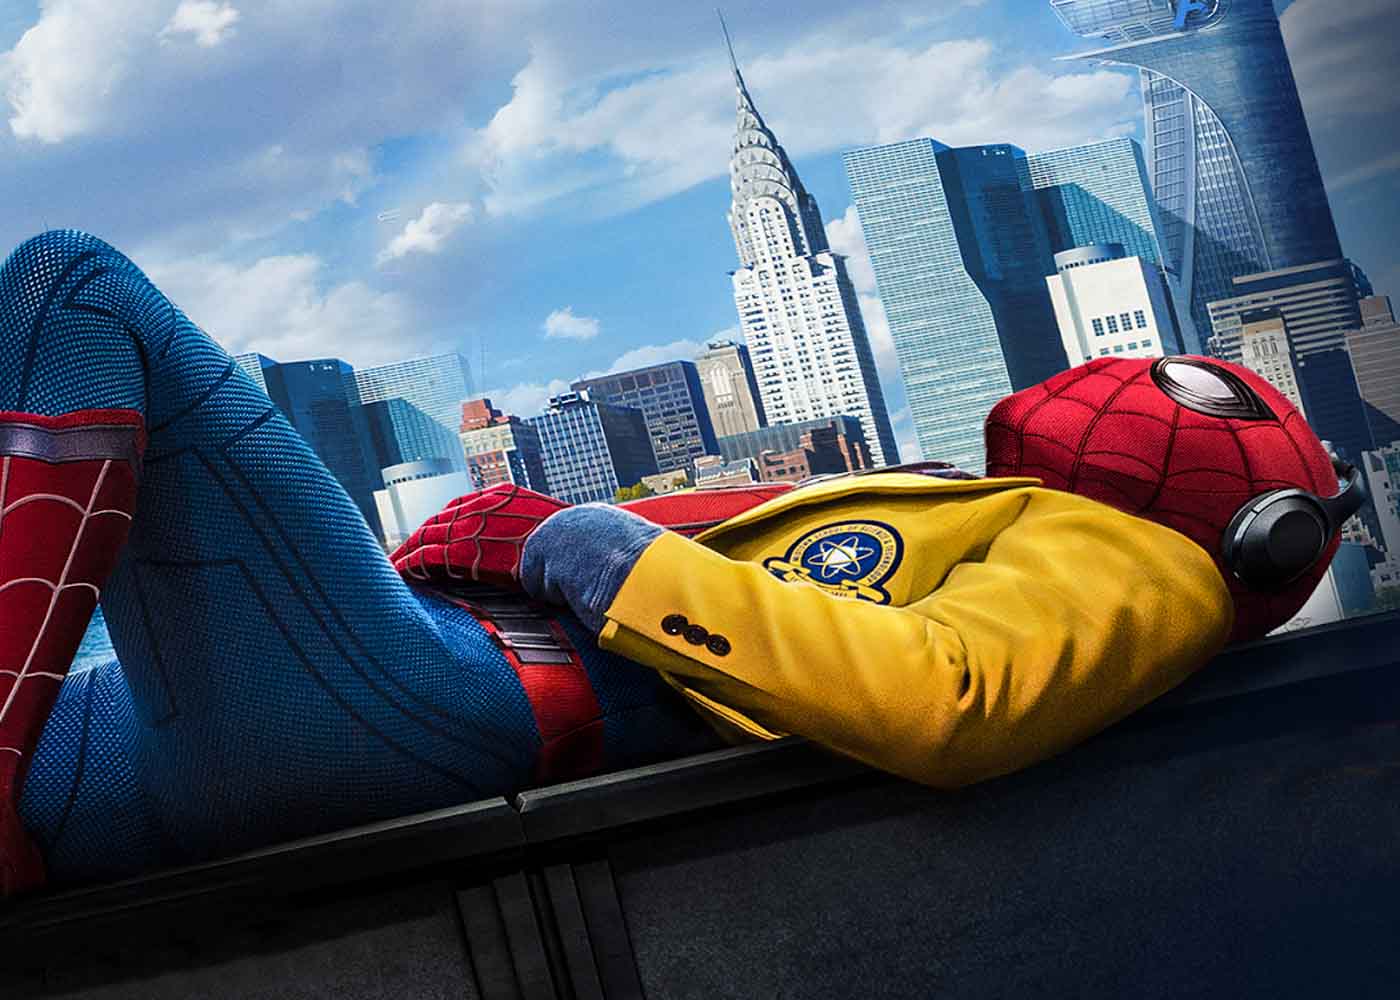 New Spider-Man: Homecoming Footage Shown During MTV Movie Awards